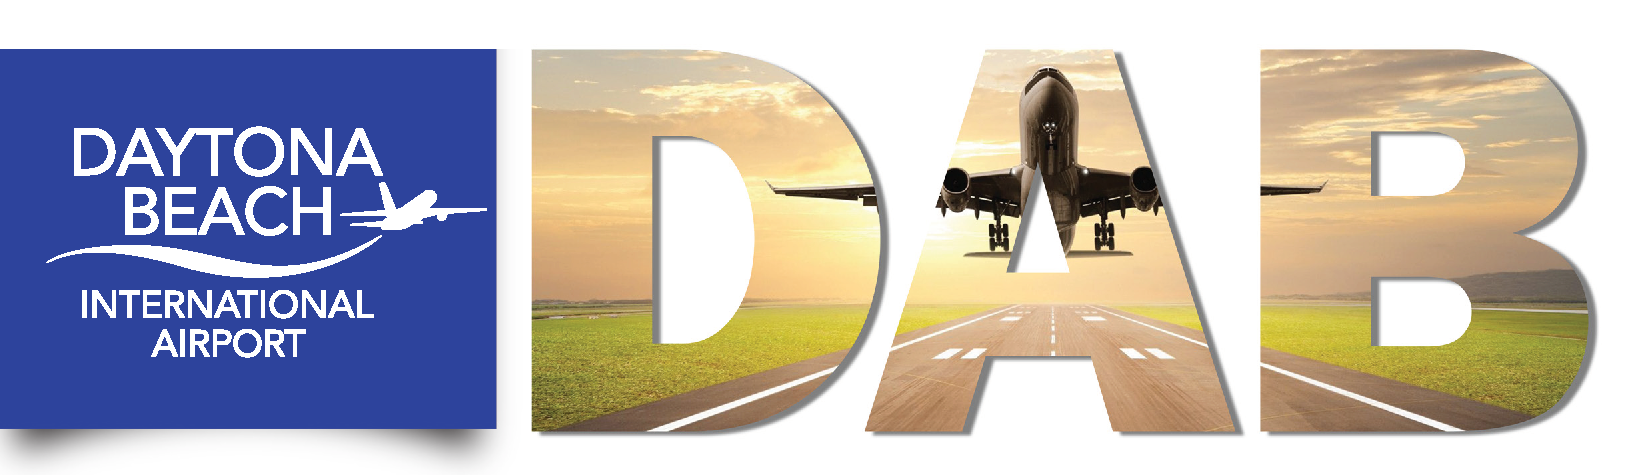 Daytona Beach International Airport logo with a plane flying. Large D.A.B. letters with the image of a plane taking off outlining the letters.